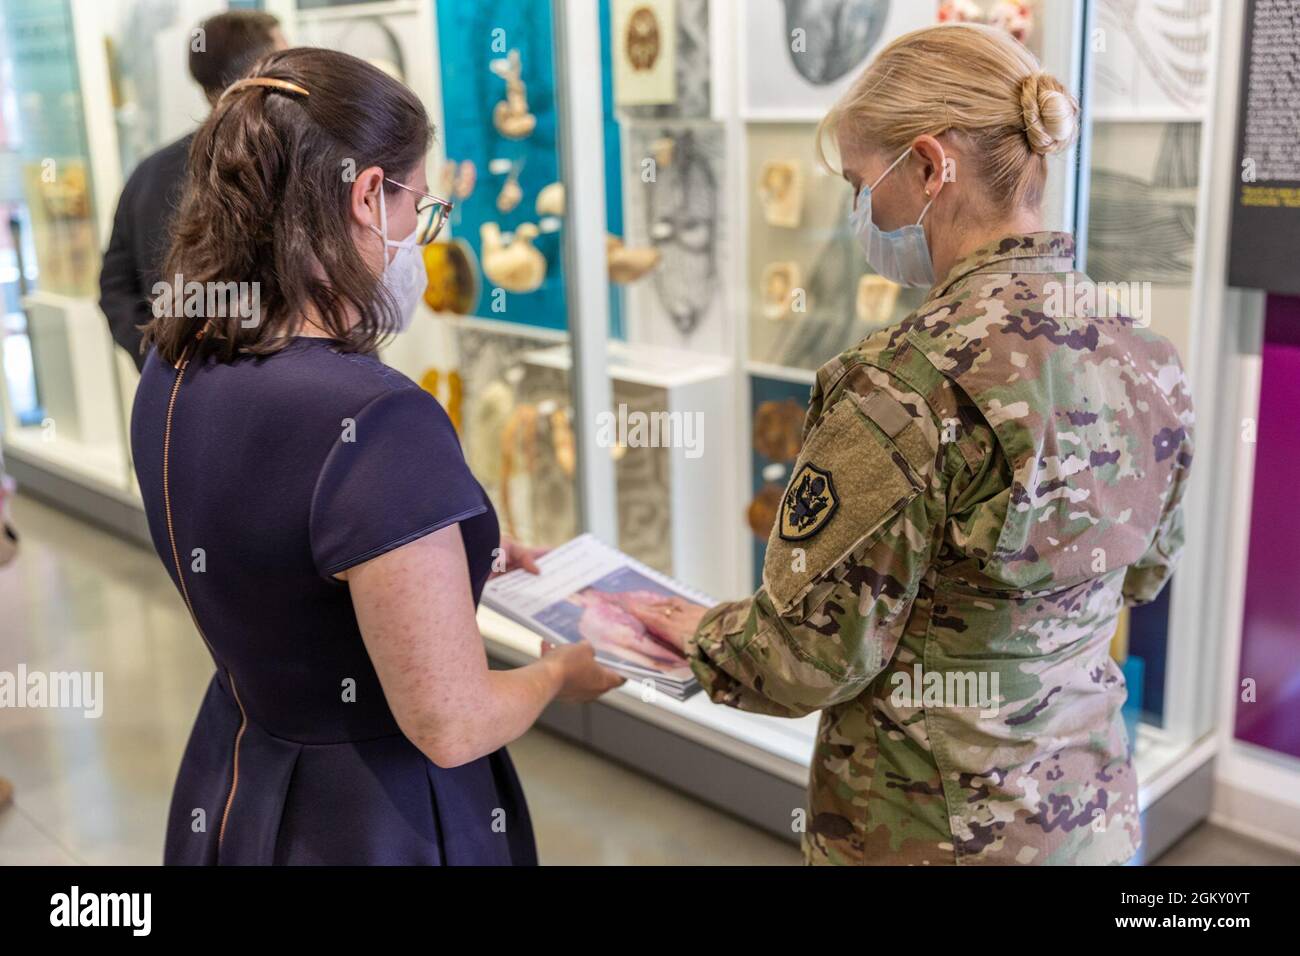 Description: Brig. Gen. Katherine Simonson 2021 Tour     Caption: Gwen Nelmes (left), Education Coordinator at the National Museum of Health and Medicine, provides a tour of the public galleries to Brig. Gen. Katherine Simonson (right), Deputy Assistant Director, Research and Development Directorate, Defense Health Agency, on July 22, 2021, at the museum in Silver Spring, Maryland. (Disclosure: This image has been cropped to emphasize the subject.) Stock Photo